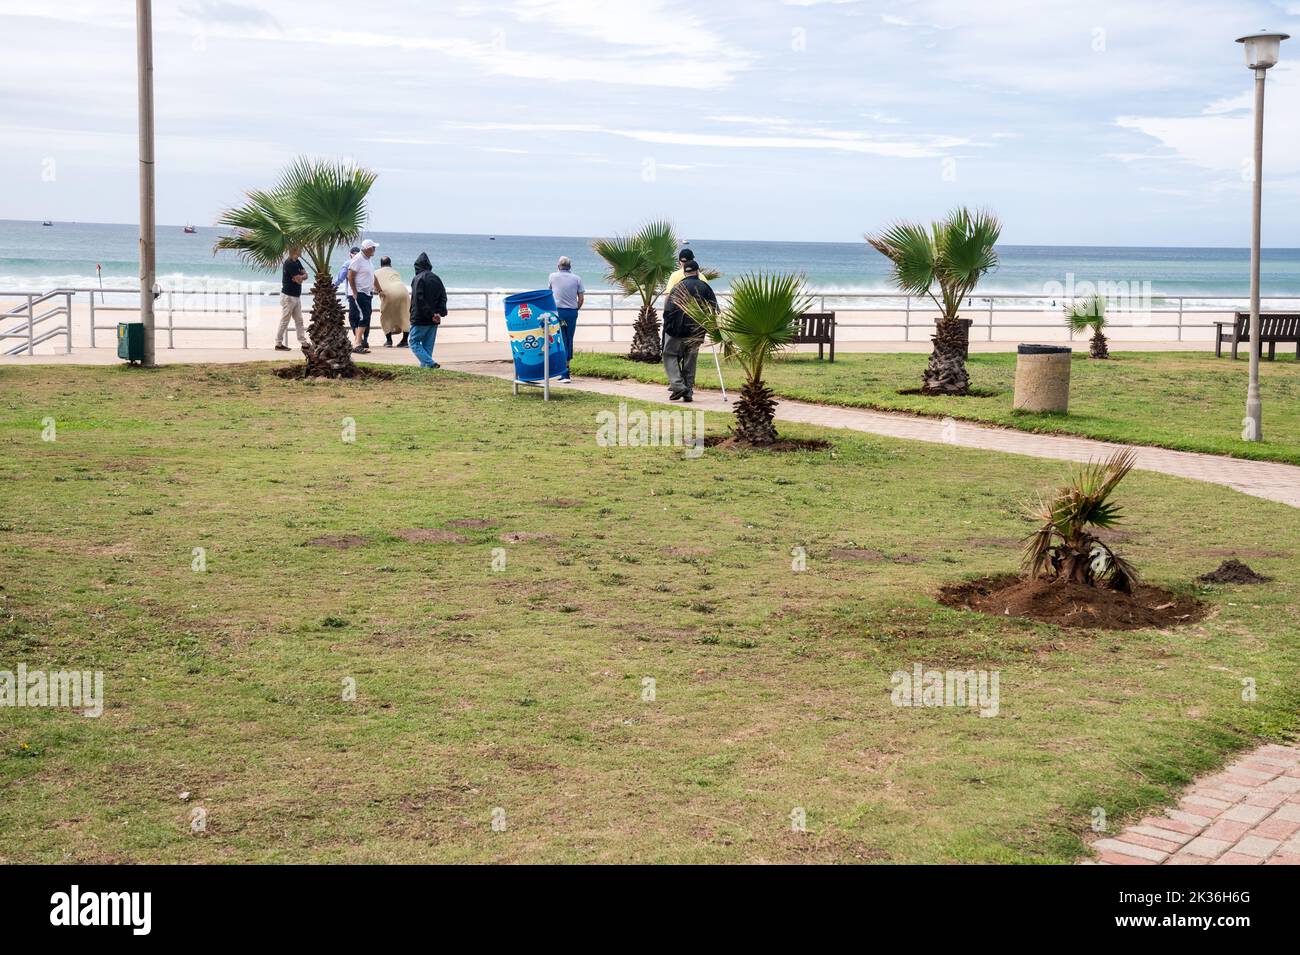 Beachside Promenade along the parkway leading to the ocean with the ocean in the background with growing short palms Stock Photo